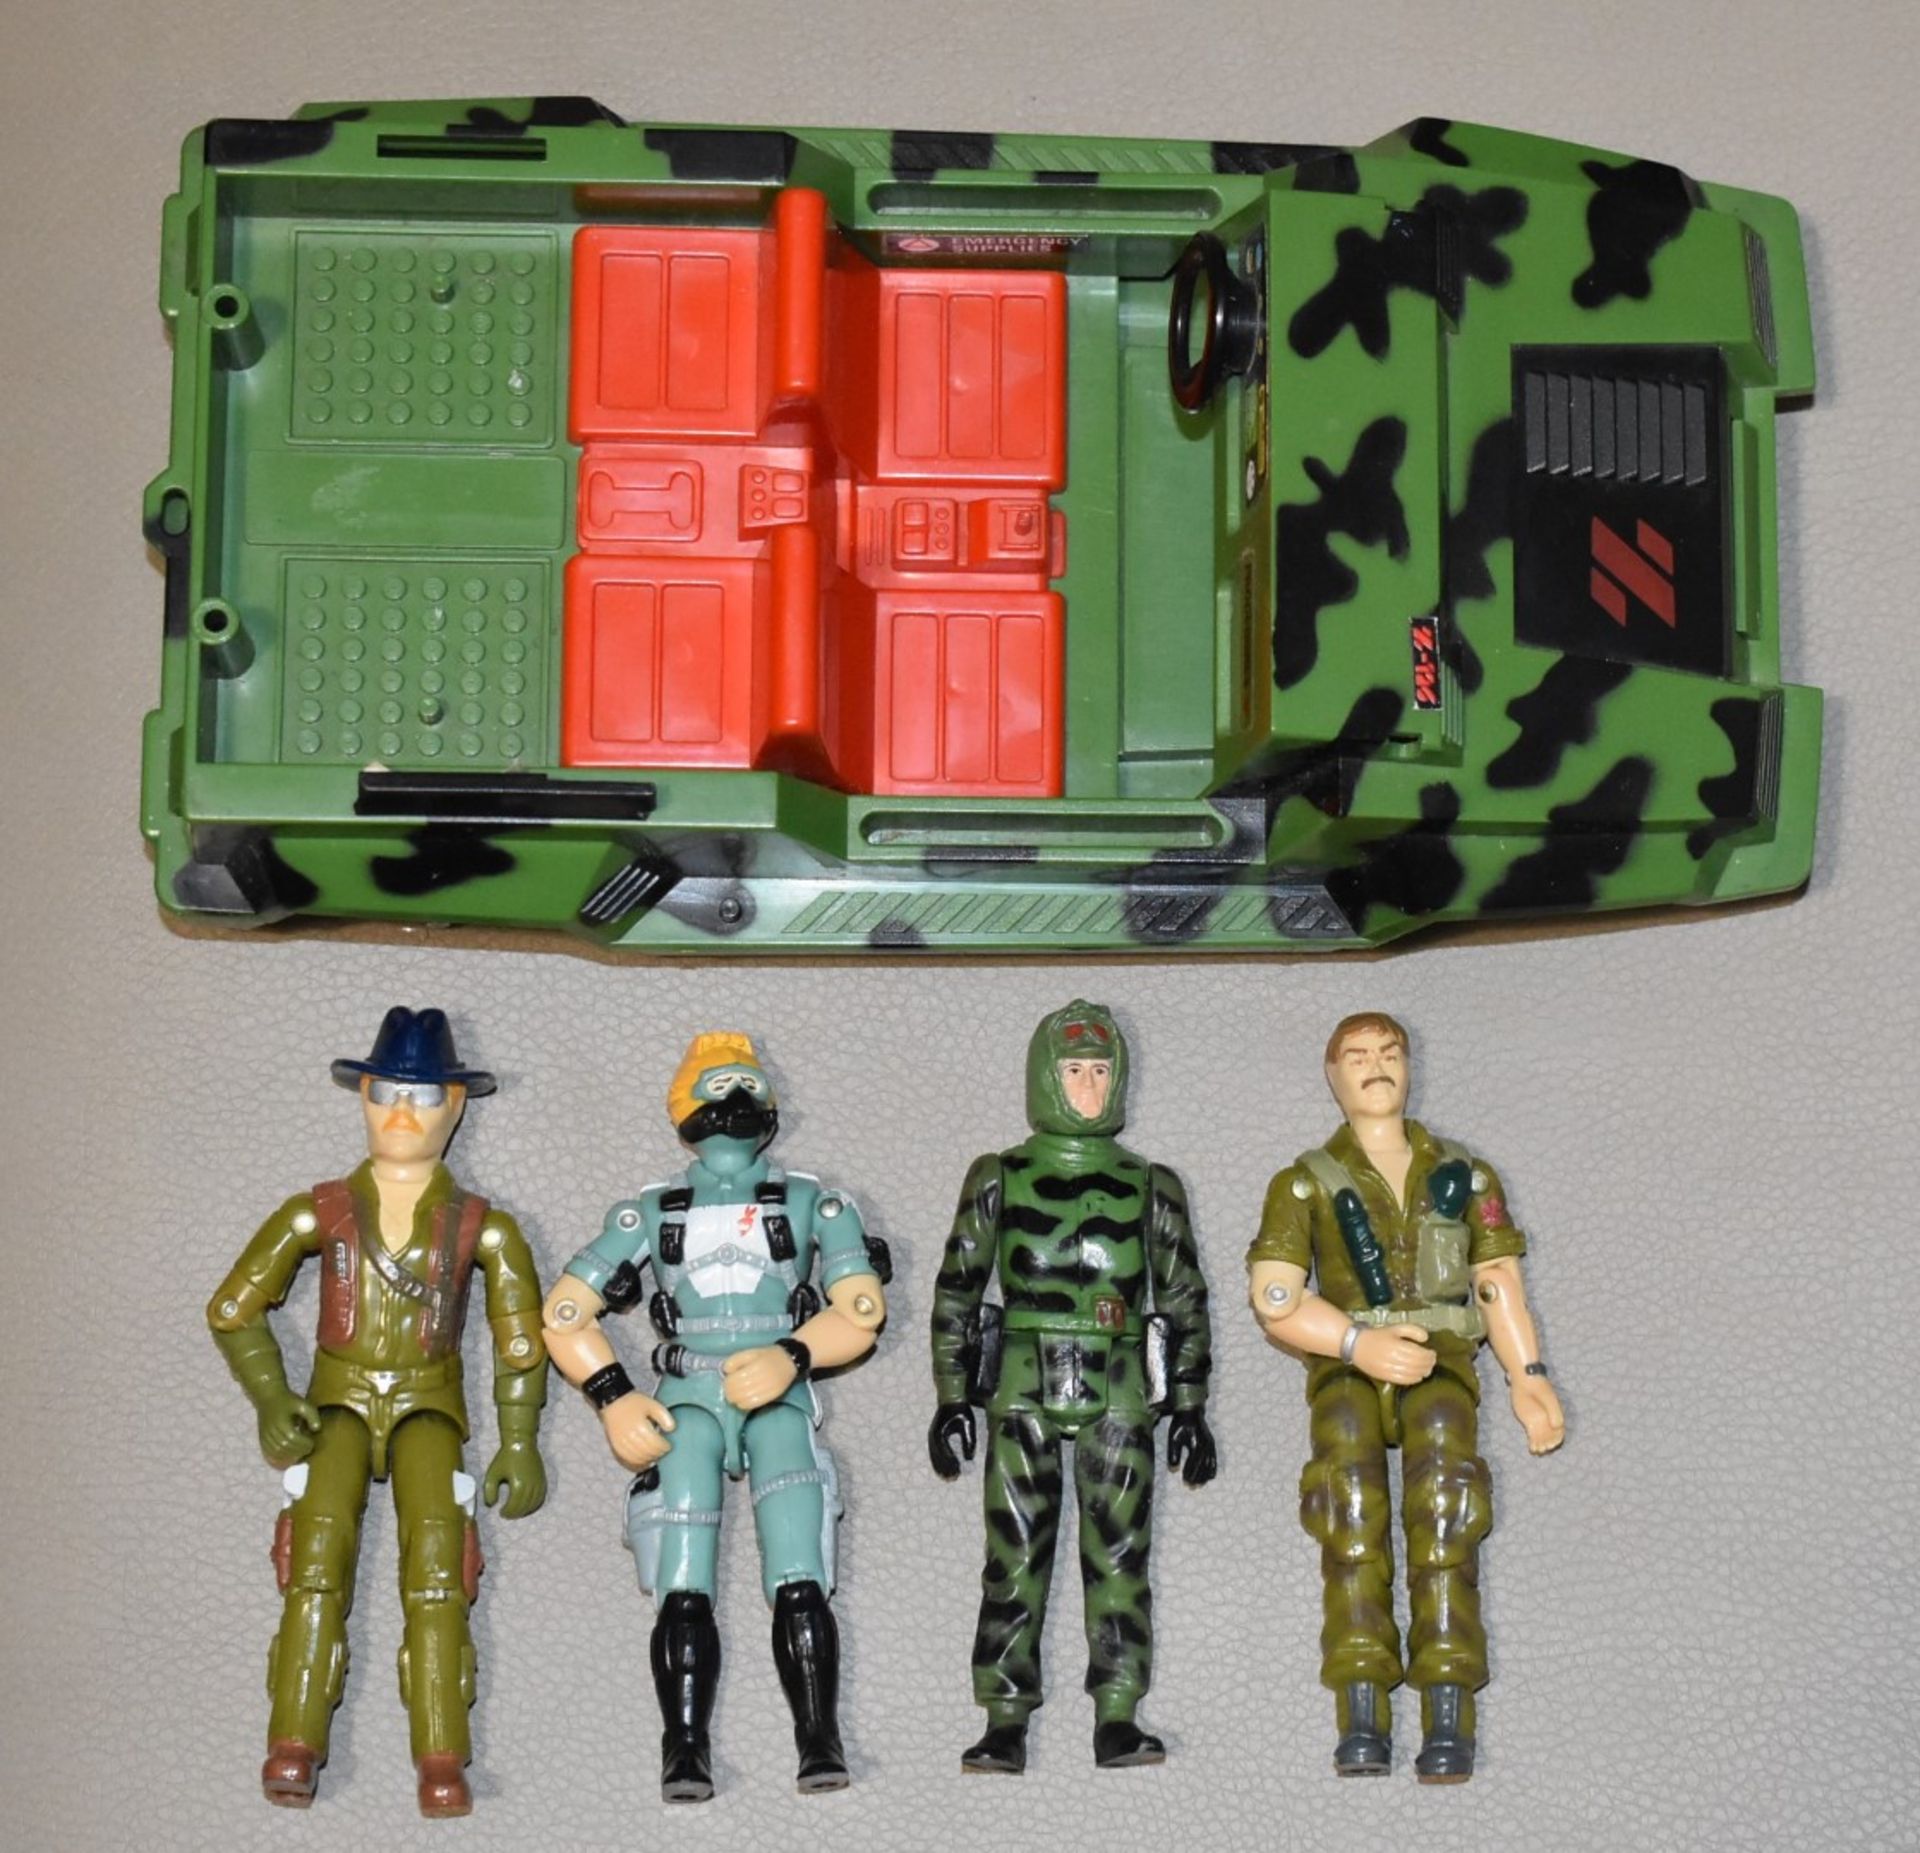 4 x Vintage Action Force Figures and Jeep - Vintage Figures in Very Good Condition